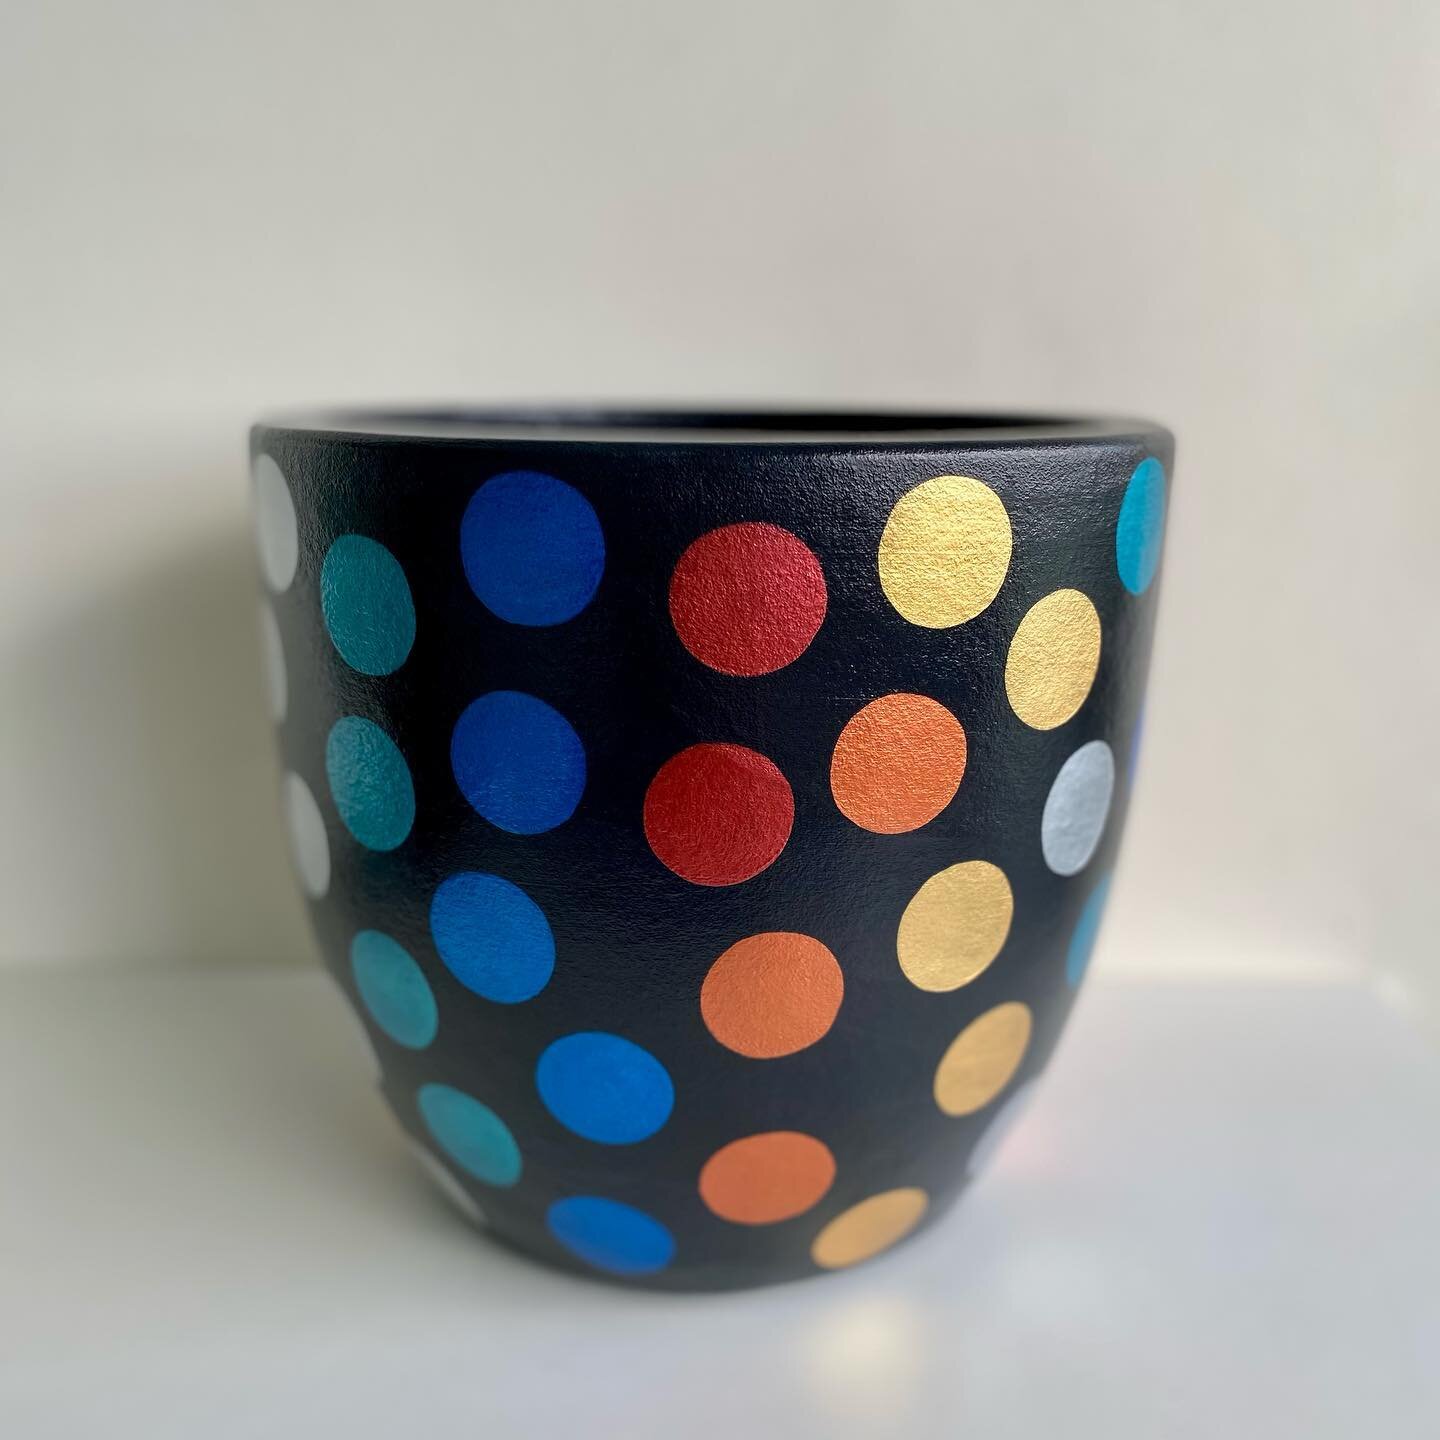 You can&rsquo;t have a bad day in polka dots! The Polka pot, only one left on the website now.